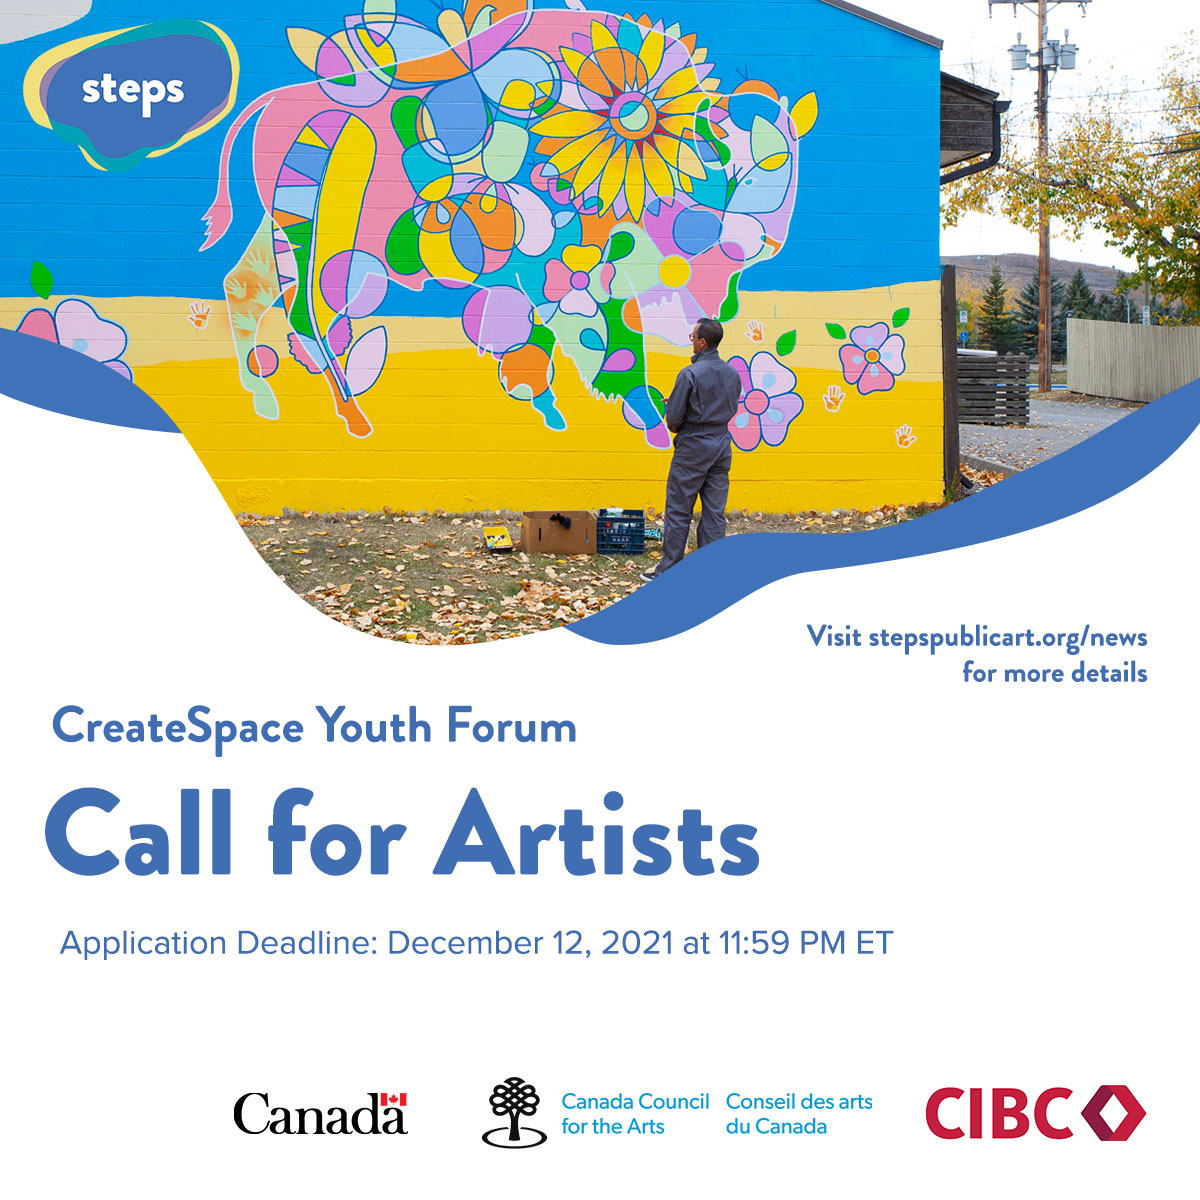 A square graphic with the STEPS logo in the top-left corner. There is a photo of a large blue and yellow mural with a colourful bison in the centre and artist Bruno Canadien standing in front of it. Below the image is blue text that say “CreateSpace Public Art Forum, Call for Artists, Application Deadline: December 12, 2021 at 11:59 PM PST, Visit stepspublicart.org/news for more details”. At the bottom are logos for the Government of Canada, Canada Council for the Arts and CIBC.